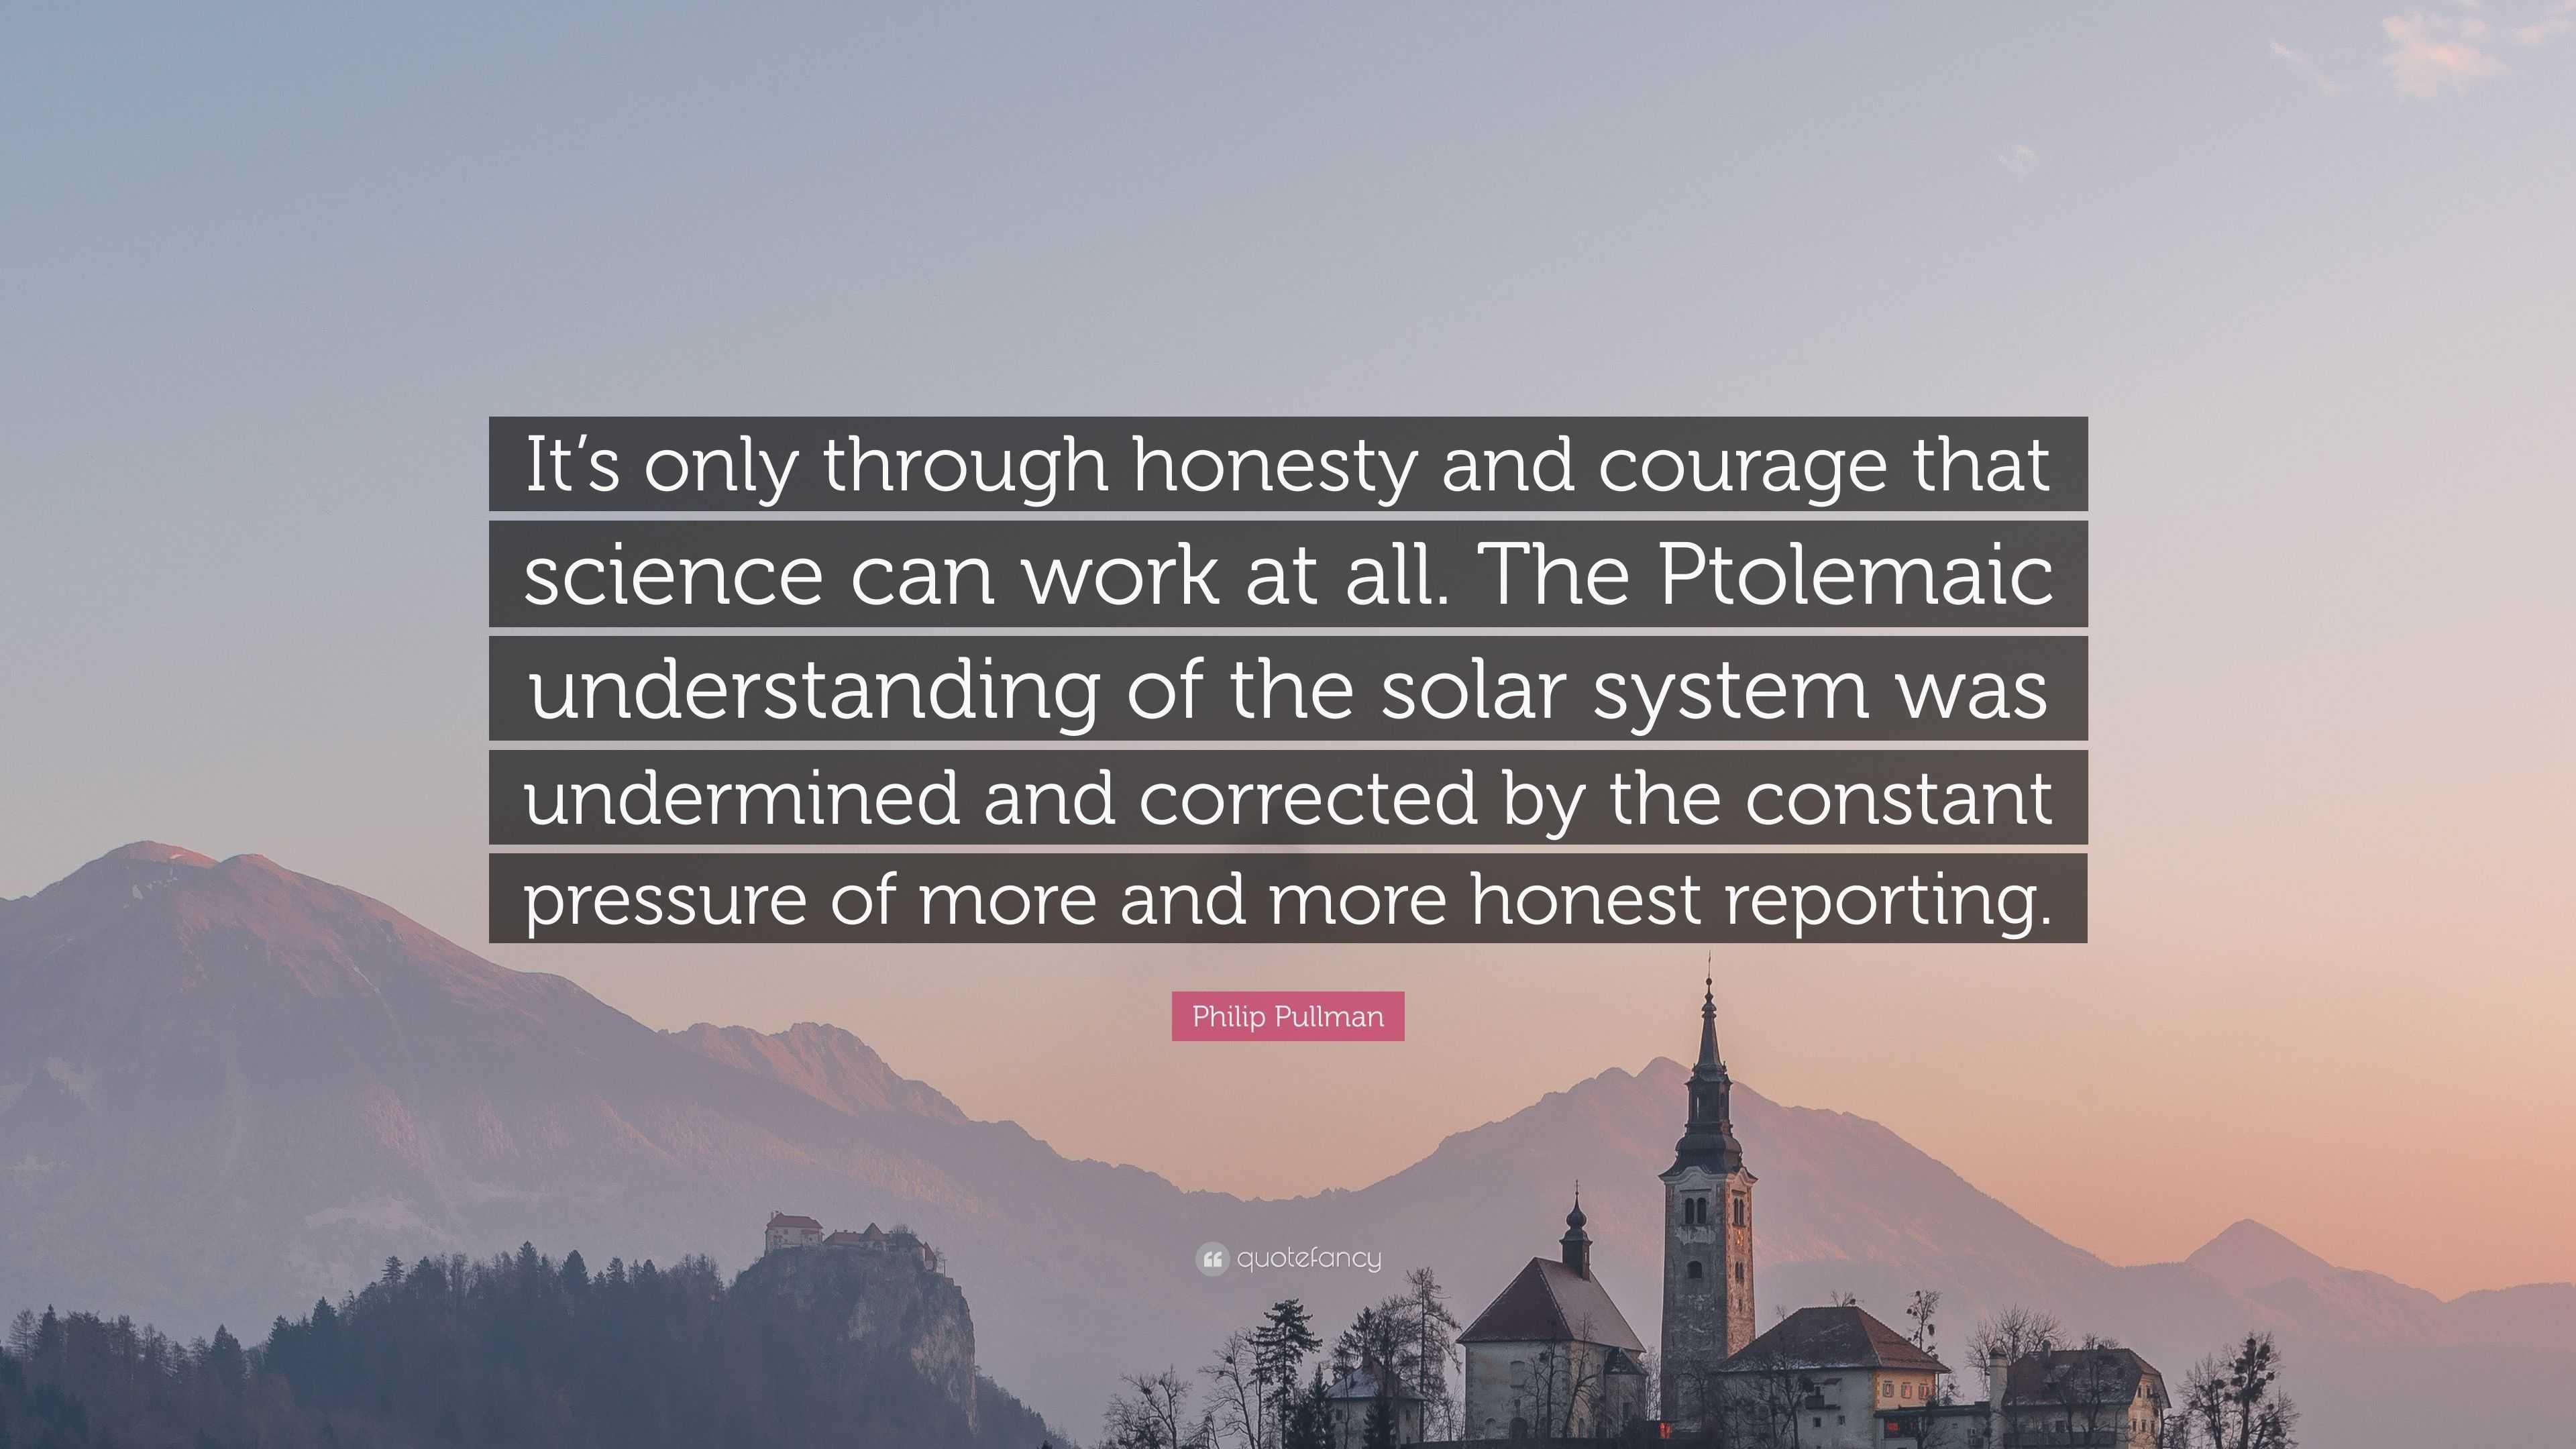 Philip Pullman Quote: “It’s only through honesty and courage that ...